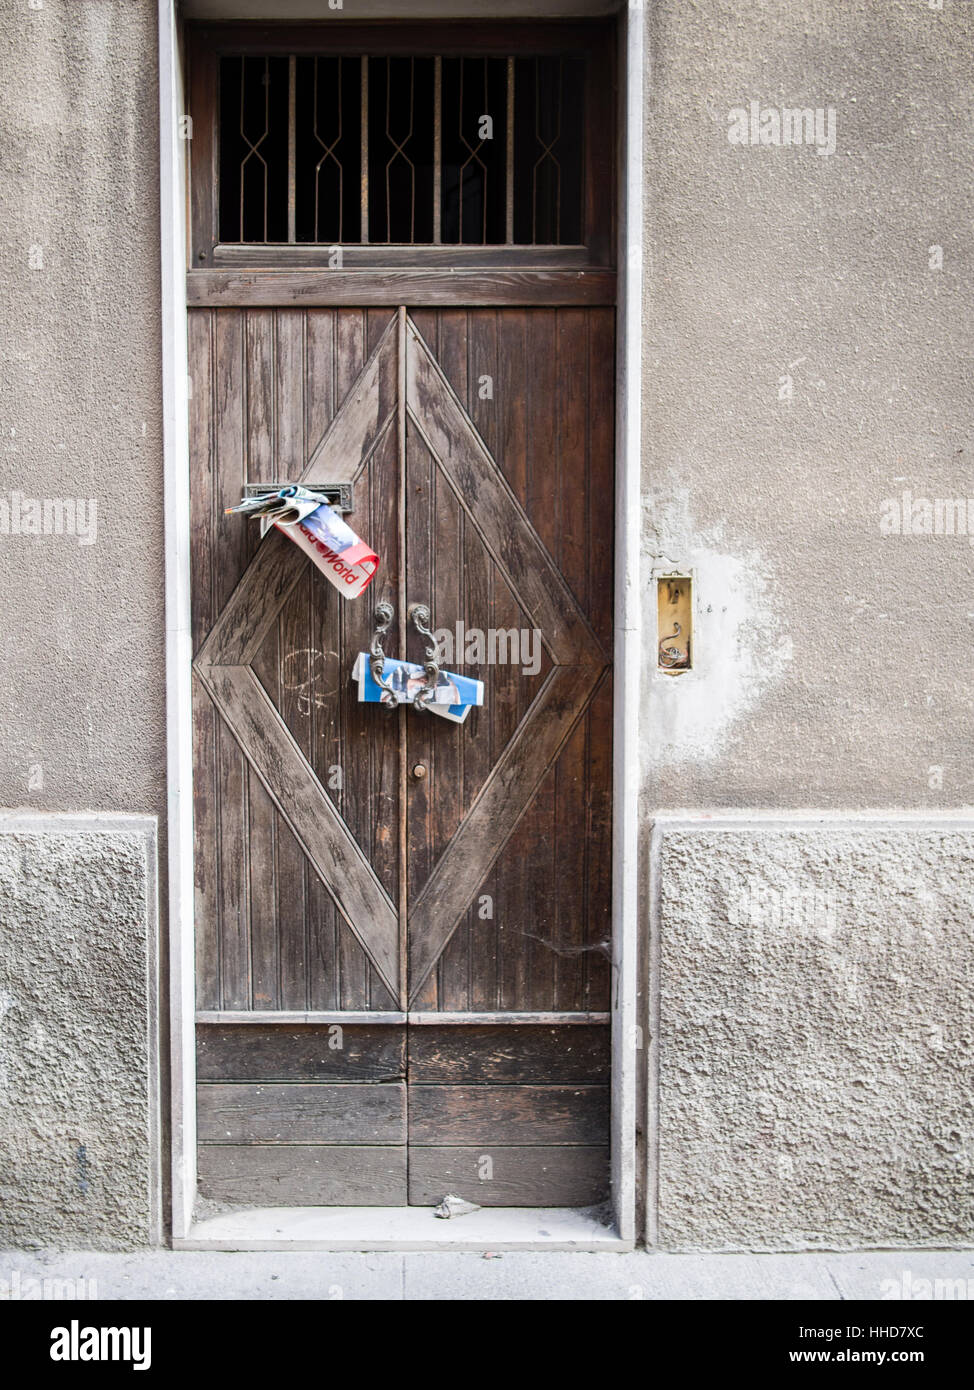 Junk mail in door handle or posto boxes in Italy. Stock Photo